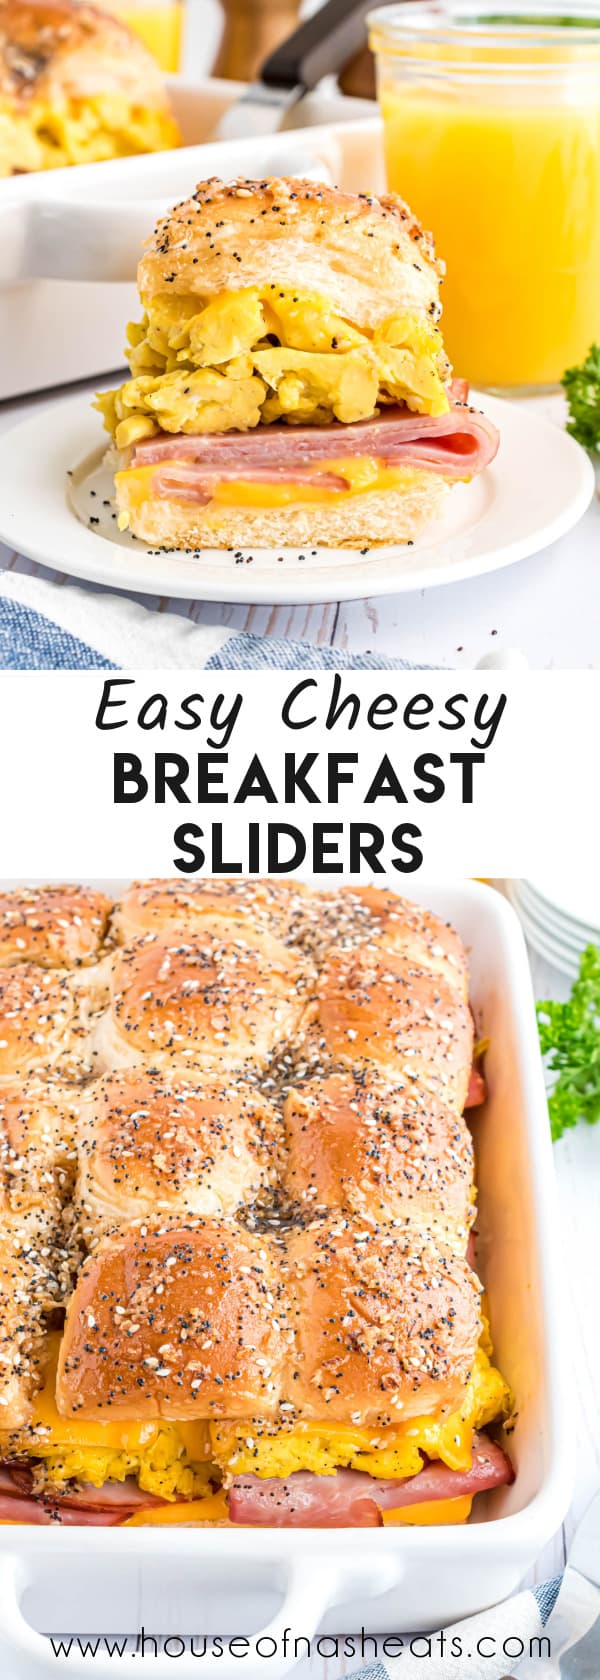 A collage of images of cheesy breakfast sliders with text overlay.